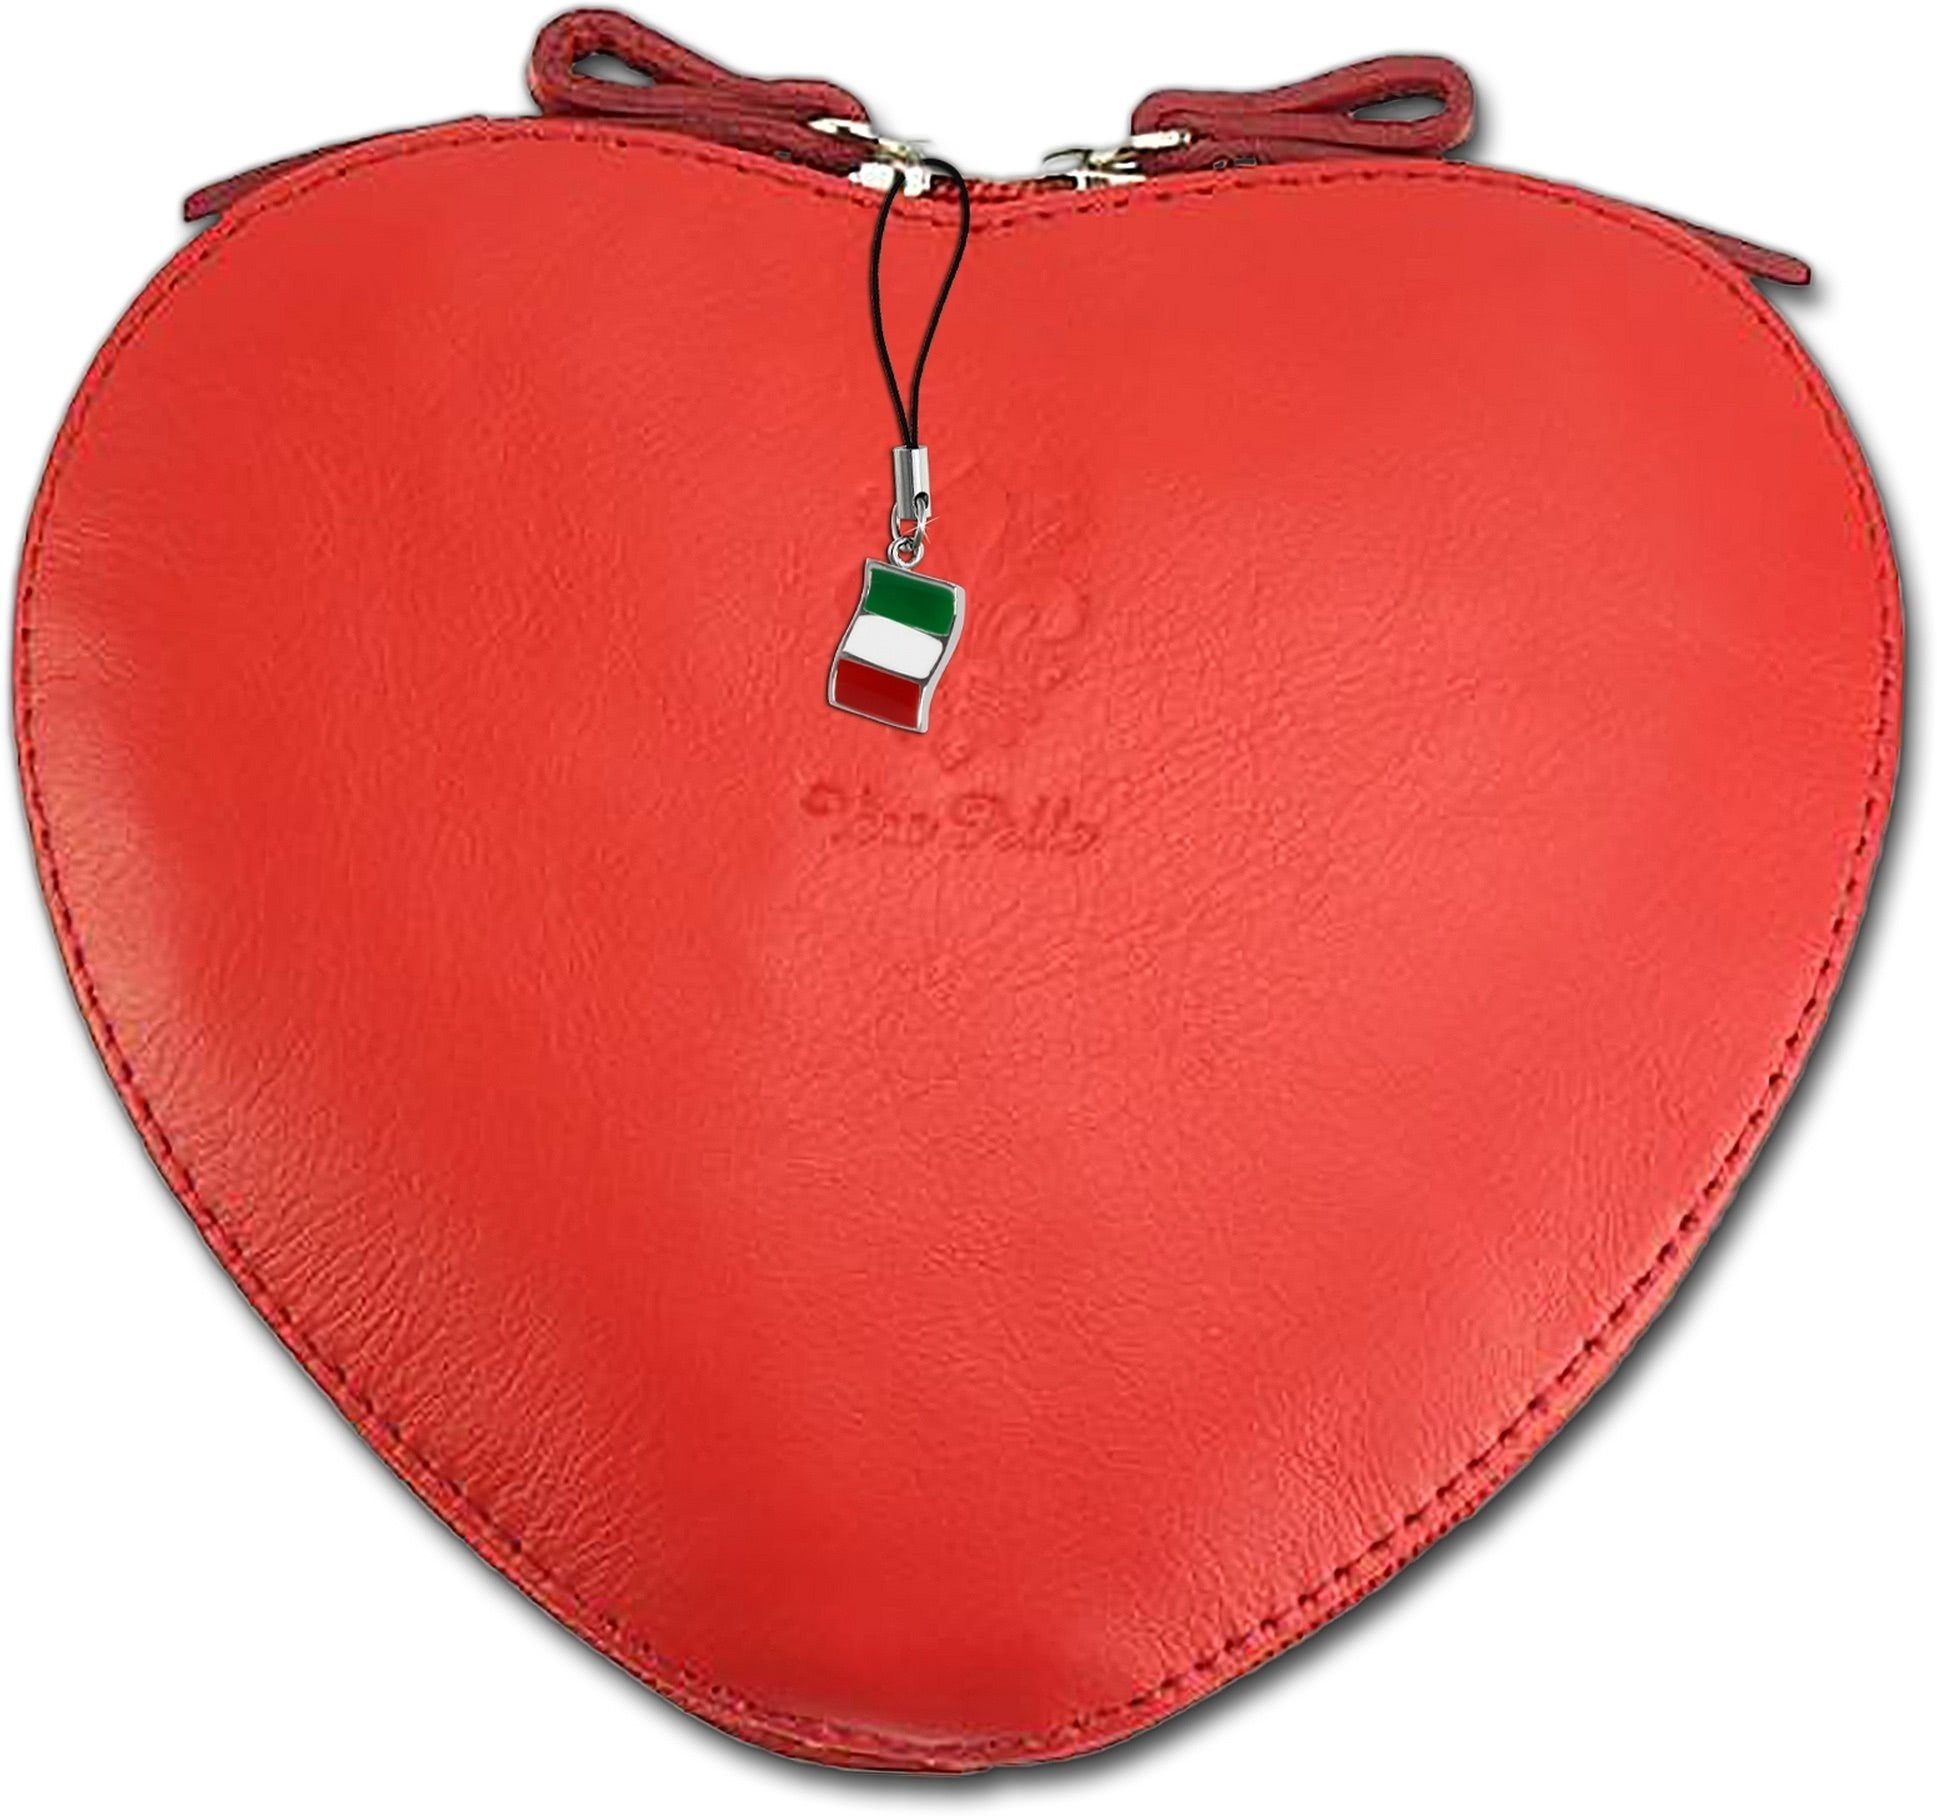 FLORENCE Clutch Florence Heart Bag Damen Tasche (Clutch, Clutch), Damen  Tasche Echtleder rot, Herz, Made-In Italy